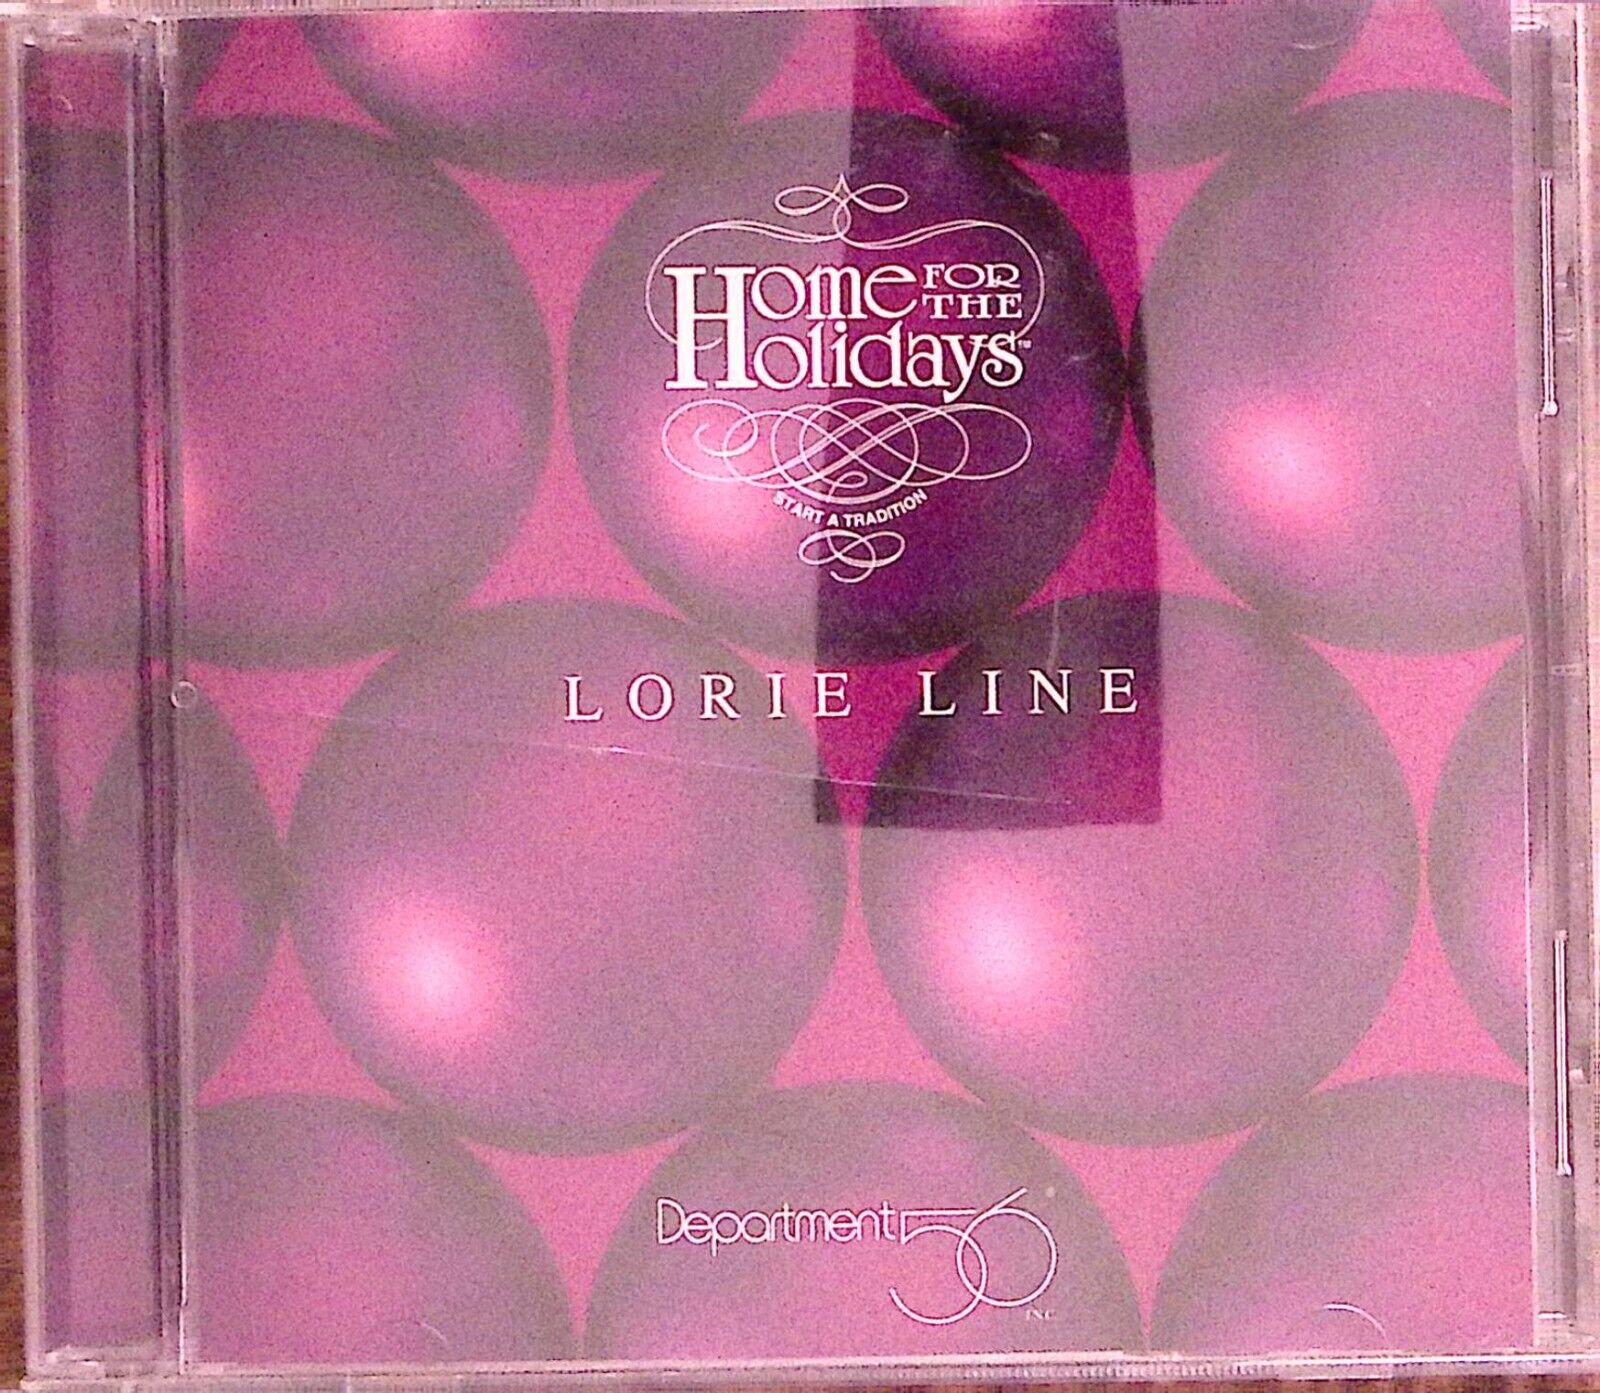 DEPARTMENT 56 LORIE LINE HOME FOR THE HOLIDAYS LIMITED EDITION CHRISTMAS CD 2654